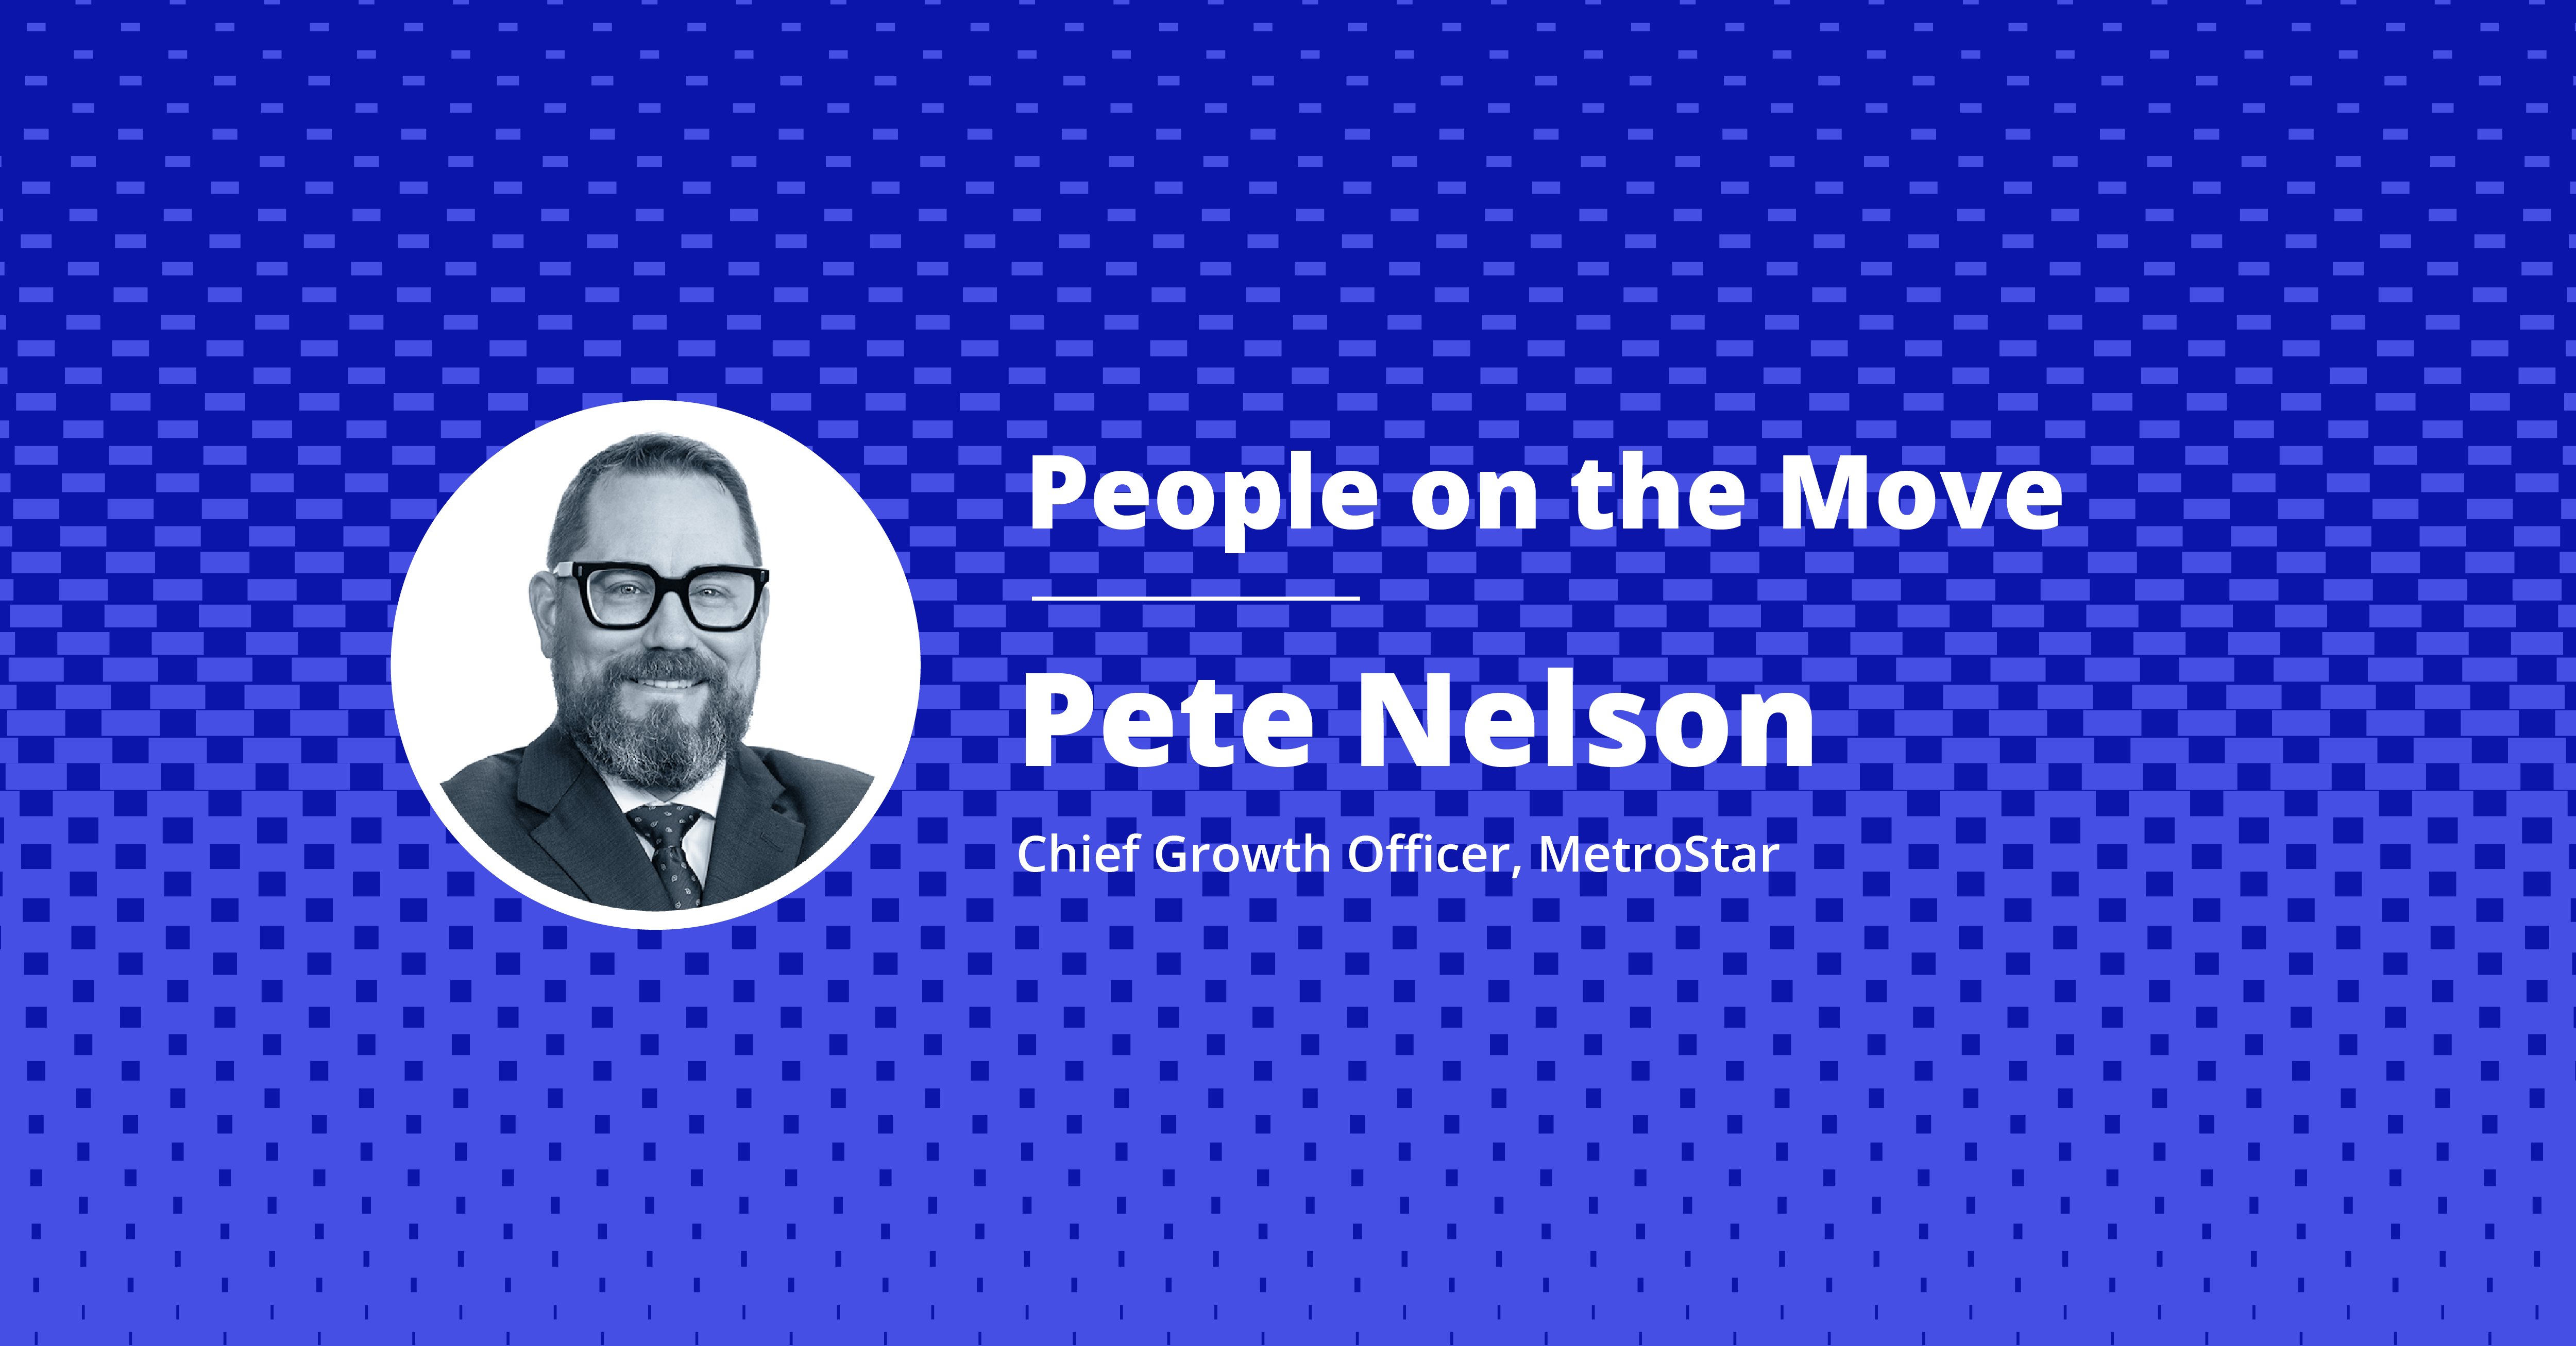 MetroStar Names Former Marine Pete Nelson as Chief Growth Officer